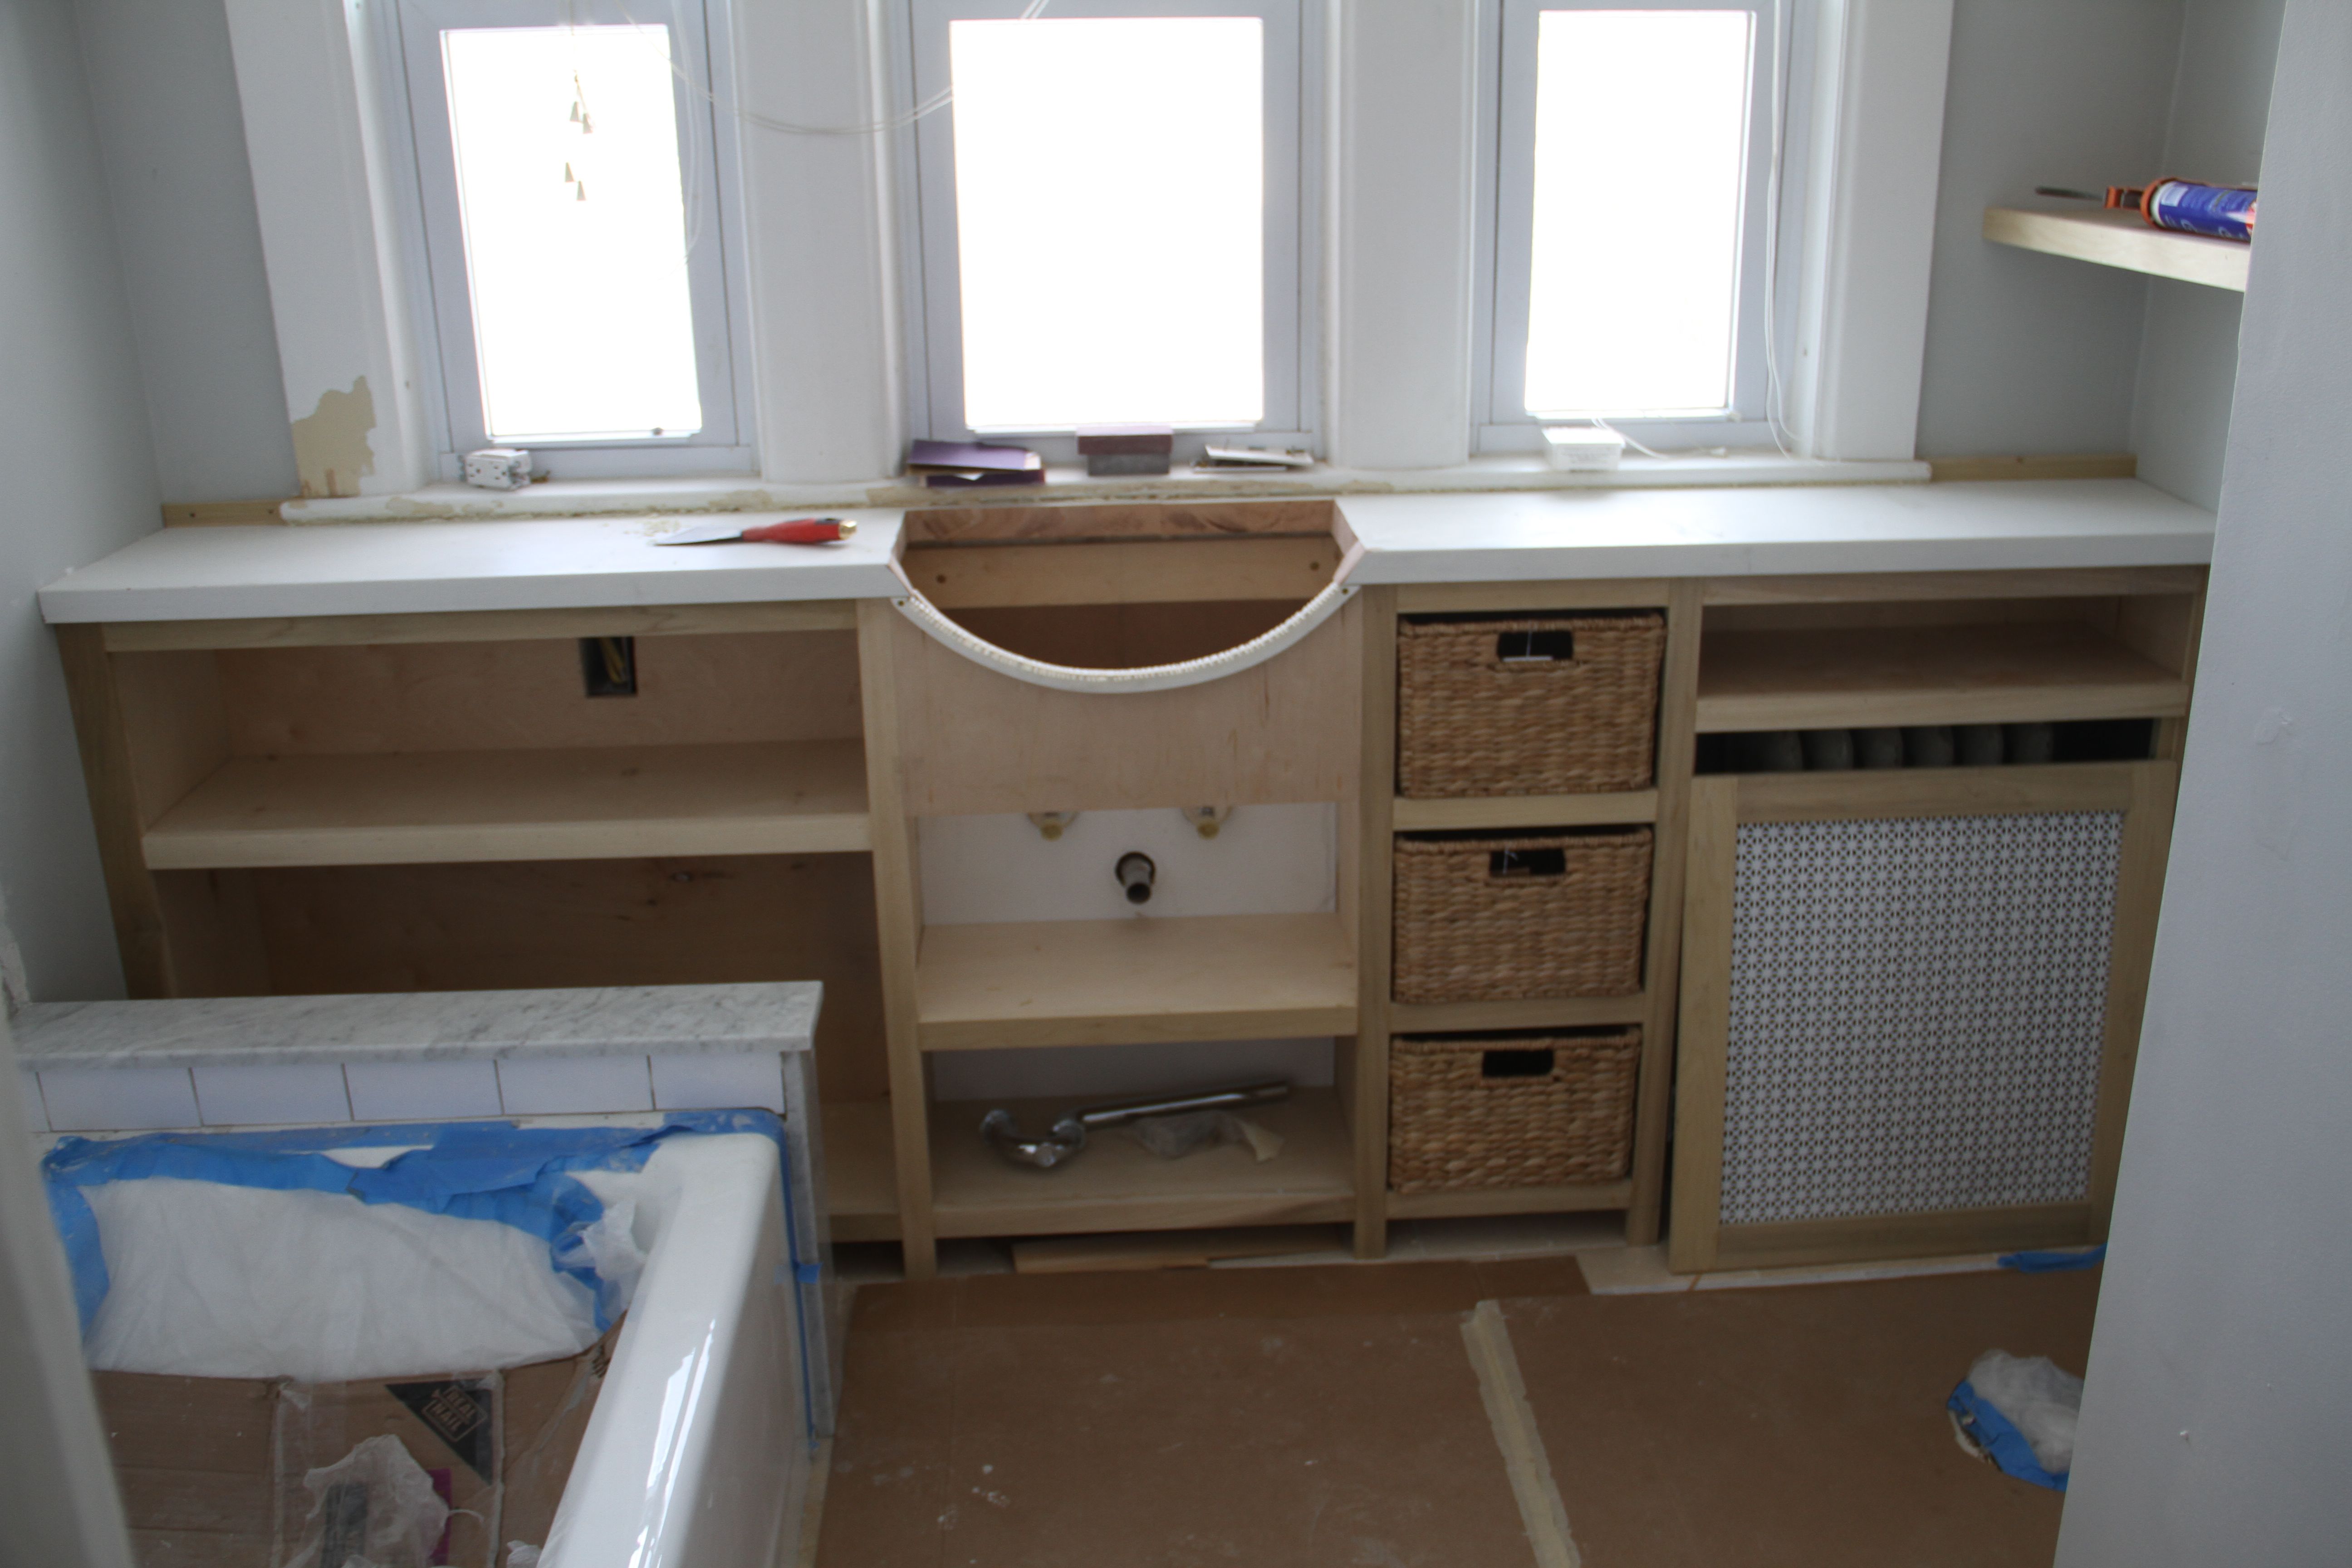 Here is the cabinet, sans sink, but with the baskets we bought for the cubbies.